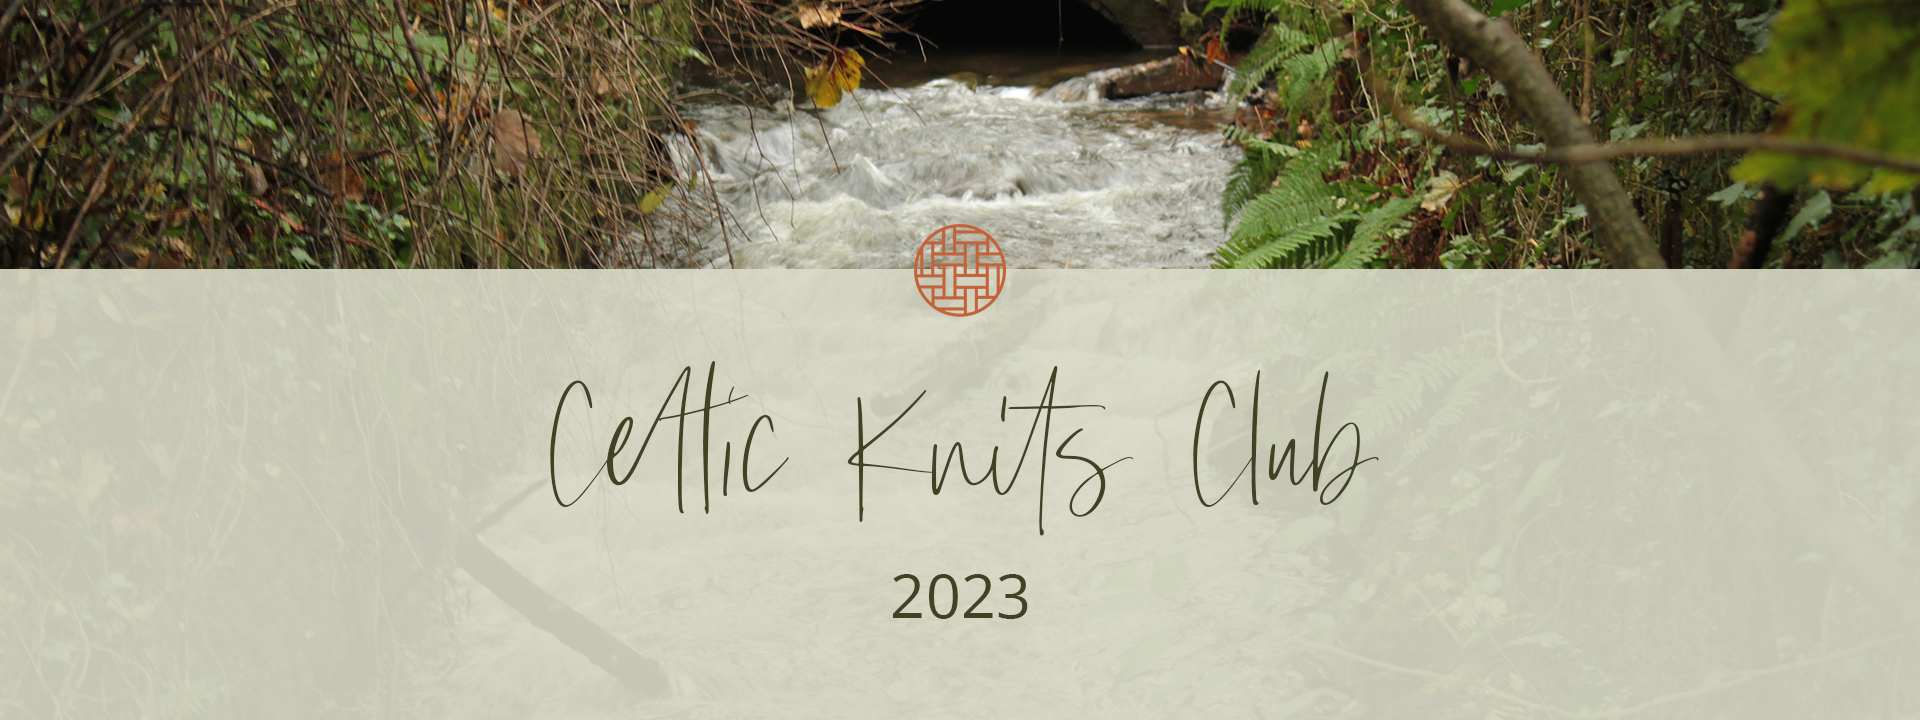 Celtic Knits Club 2023 banner wide